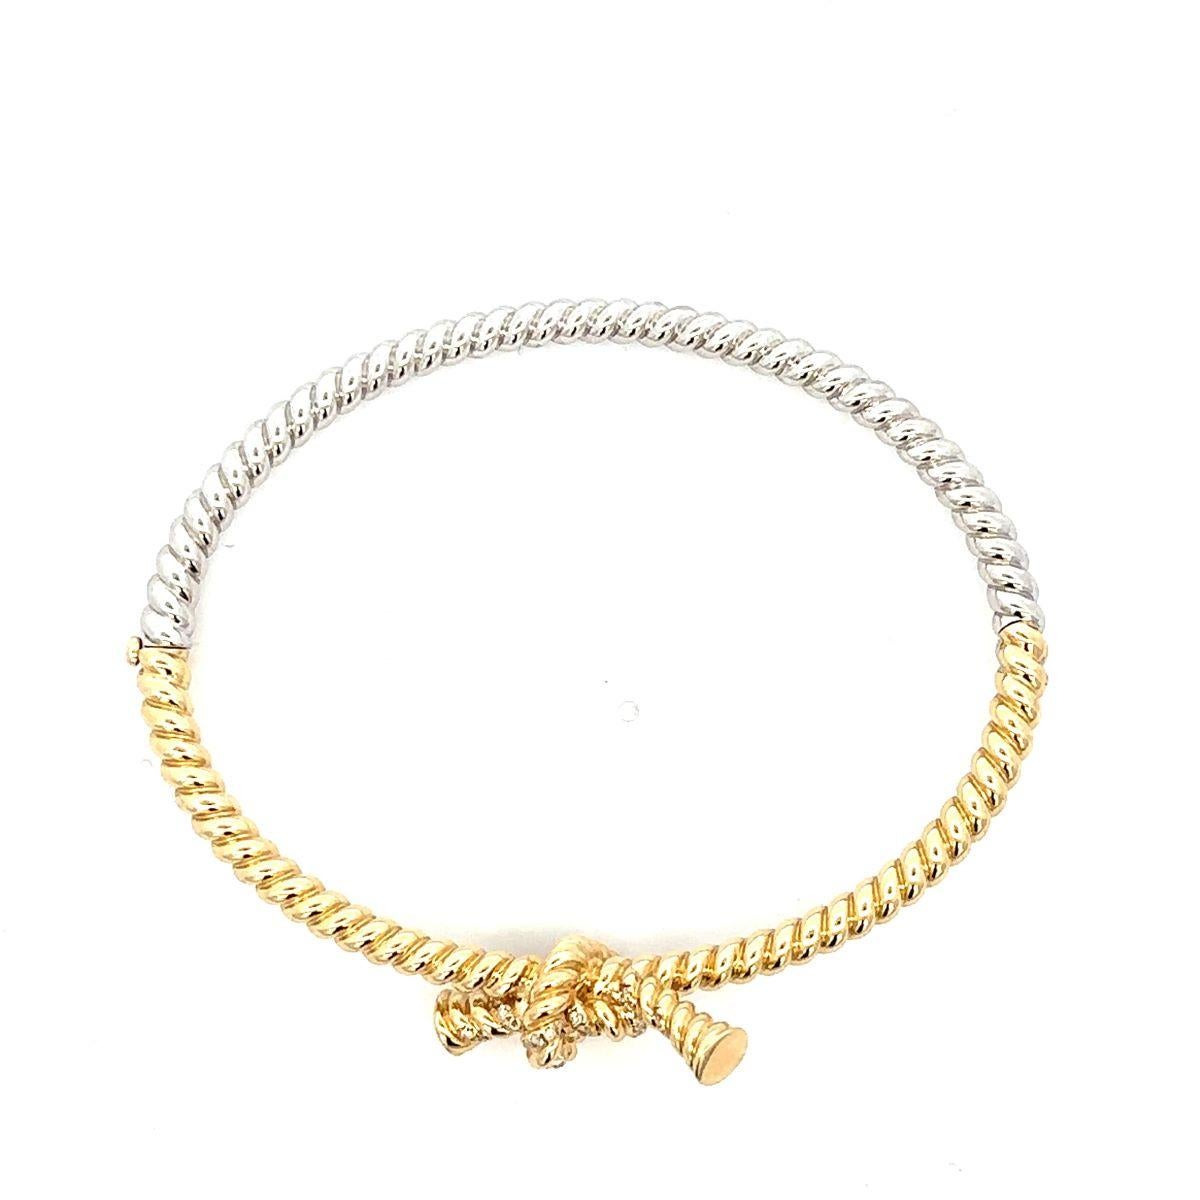 Adina Reyter One of a Kind Pavé Rope Knot Bangle Bracelet

This mixed metal bangle is 14k yellow gold and sterling silver bracelet with hand set pave diamond rope knot. Perfect wrist addition for those that love gold and silver equally! 

3mm